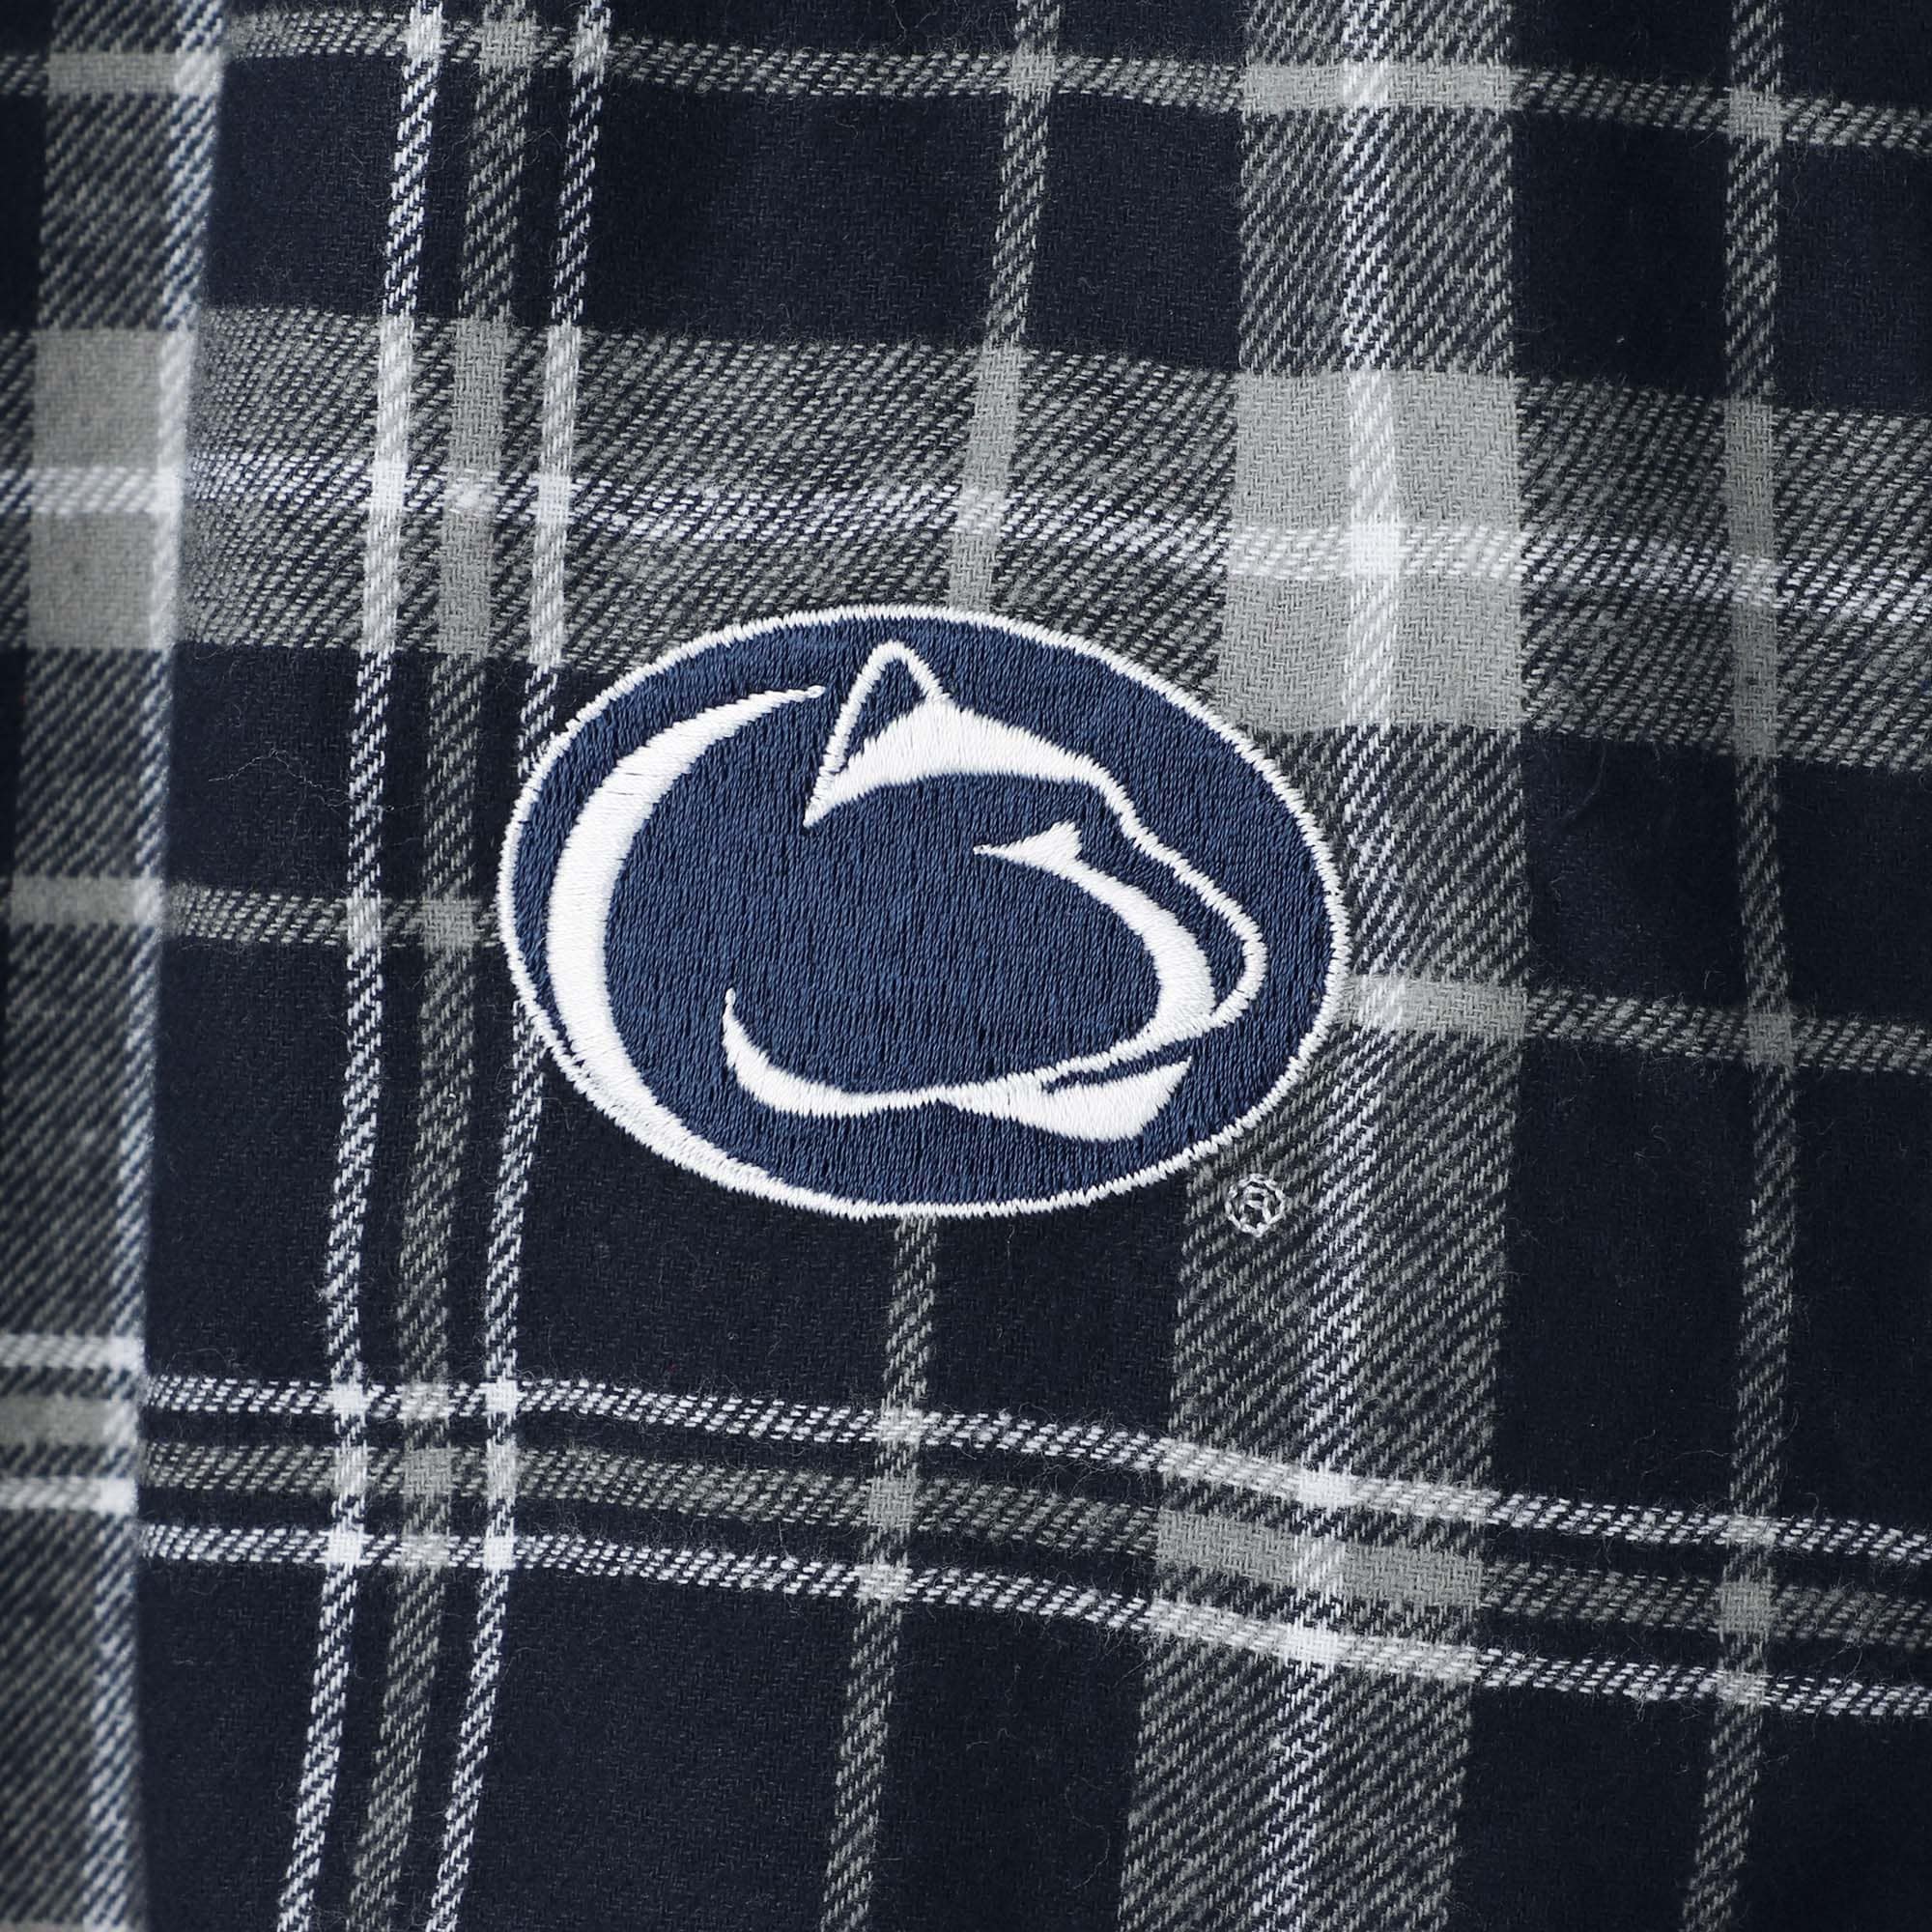 Men's Concepts Sport Navy/Gray Penn State Nittany Lions Ultimate Flannel Pants - image 2 of 2